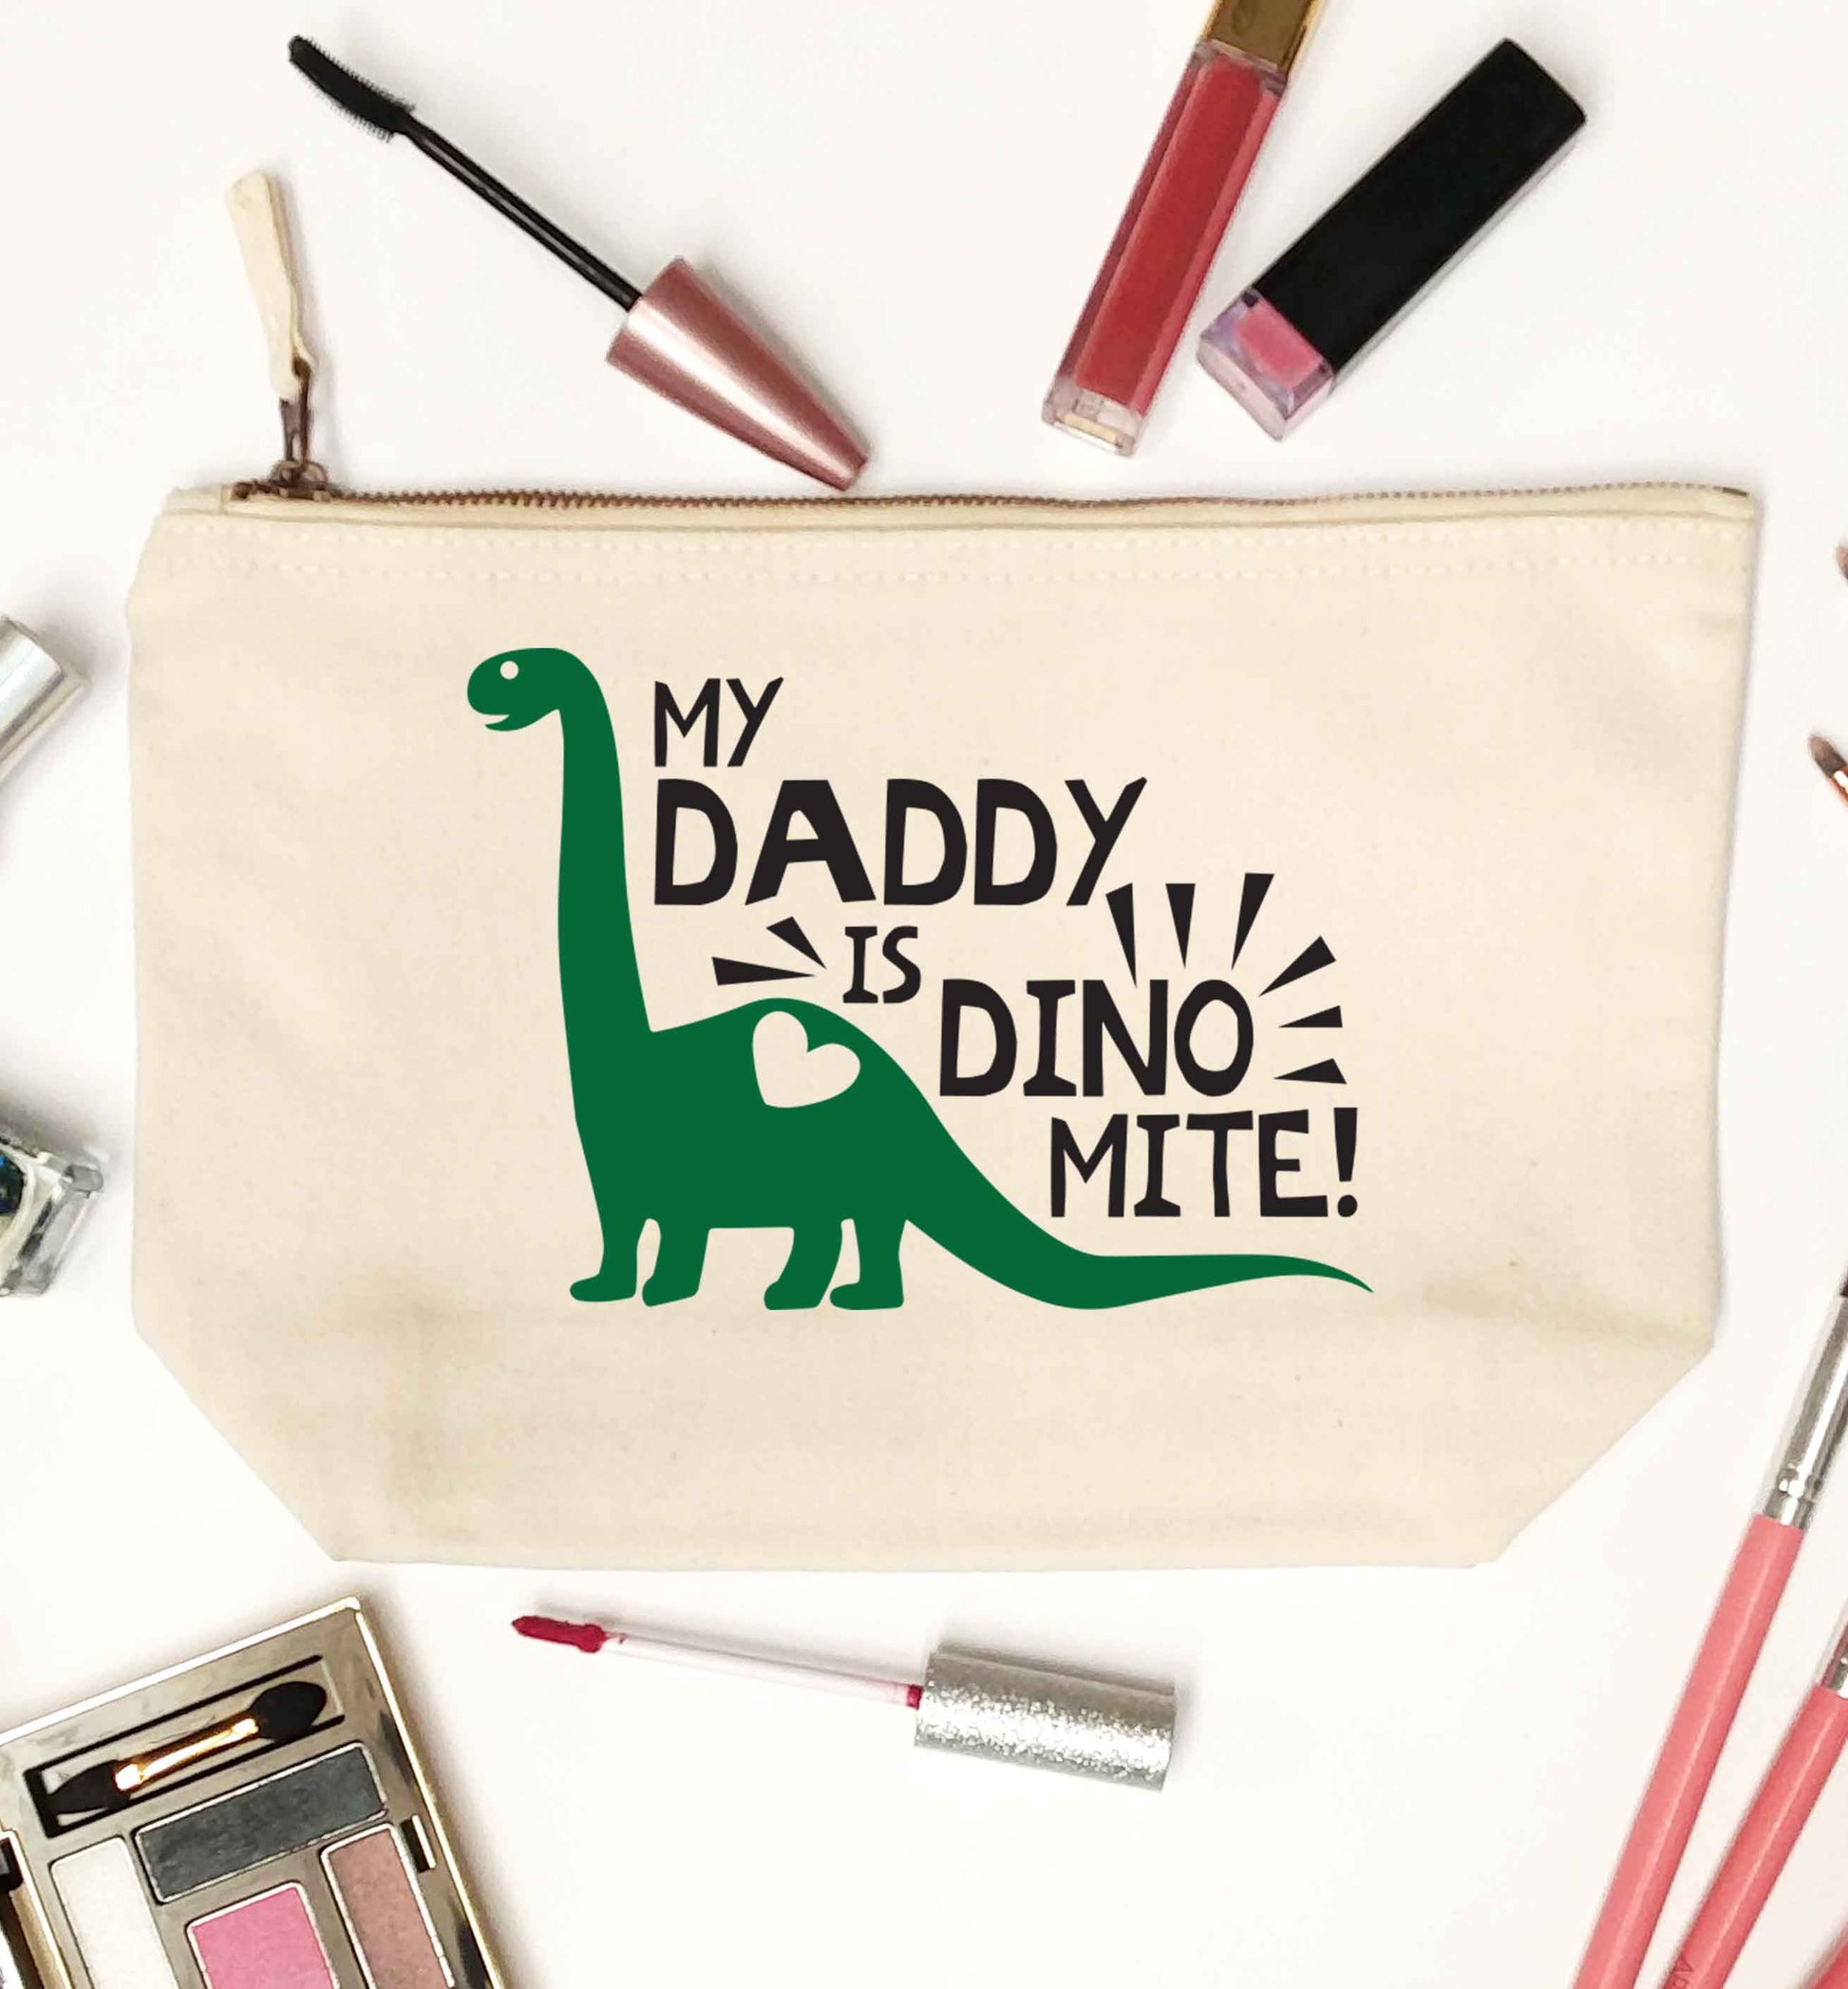 My daddy is dinomite! natural makeup bag